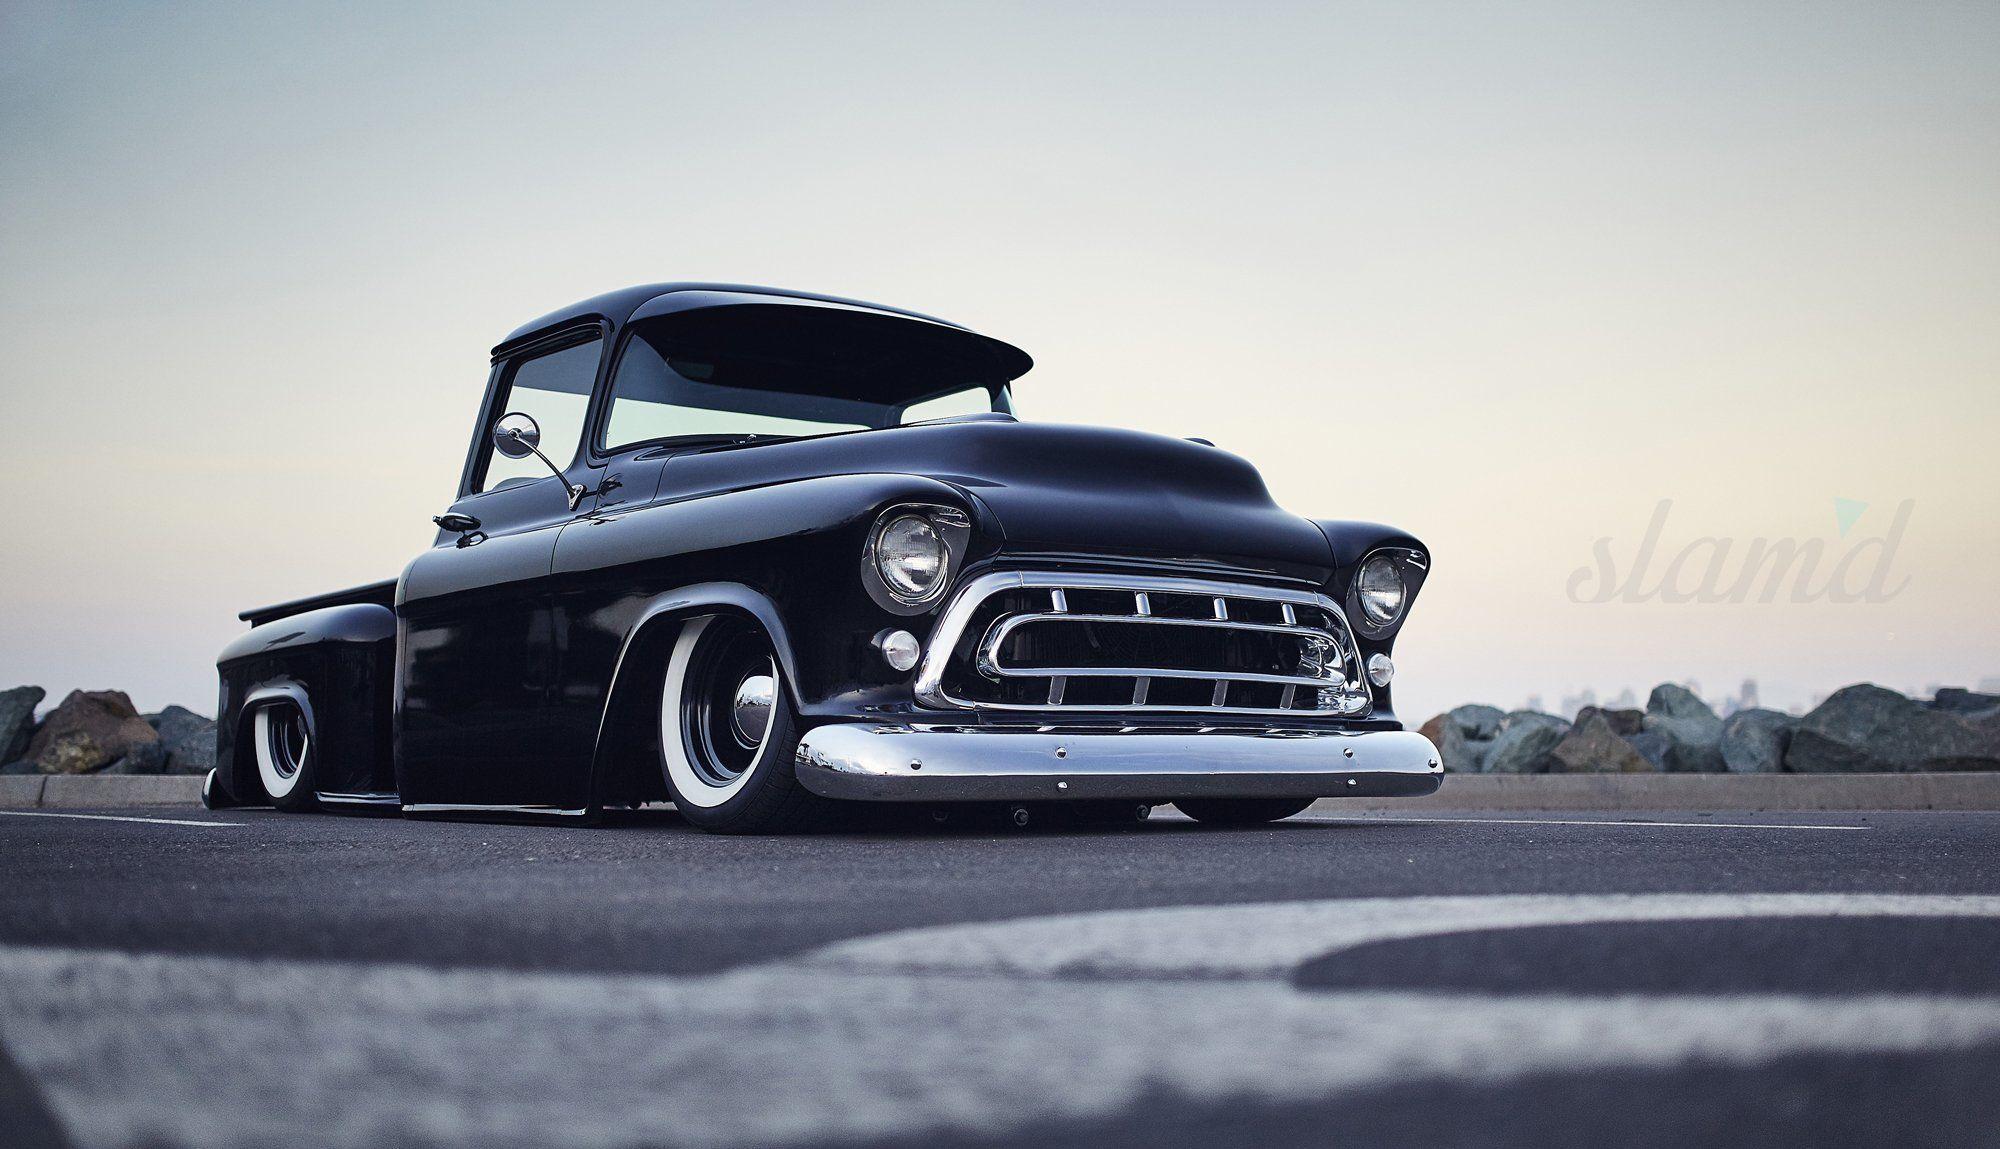 Classic Chevy Truck Wallpapers - Top